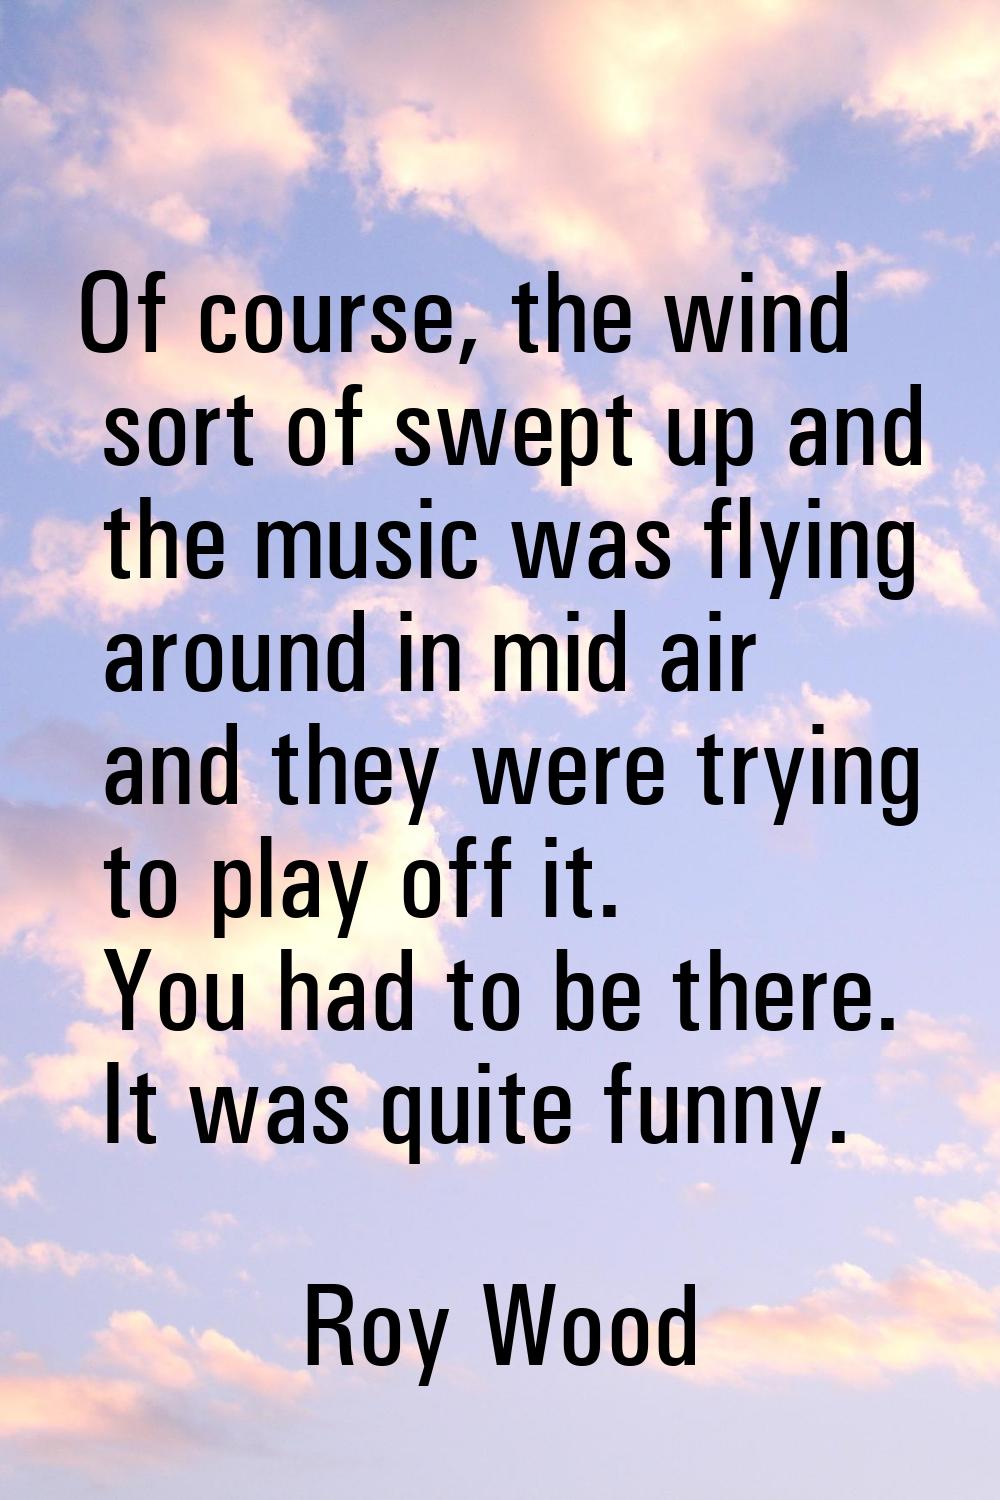 Of course, the wind sort of swept up and the music was flying around in mid air and they were tryin